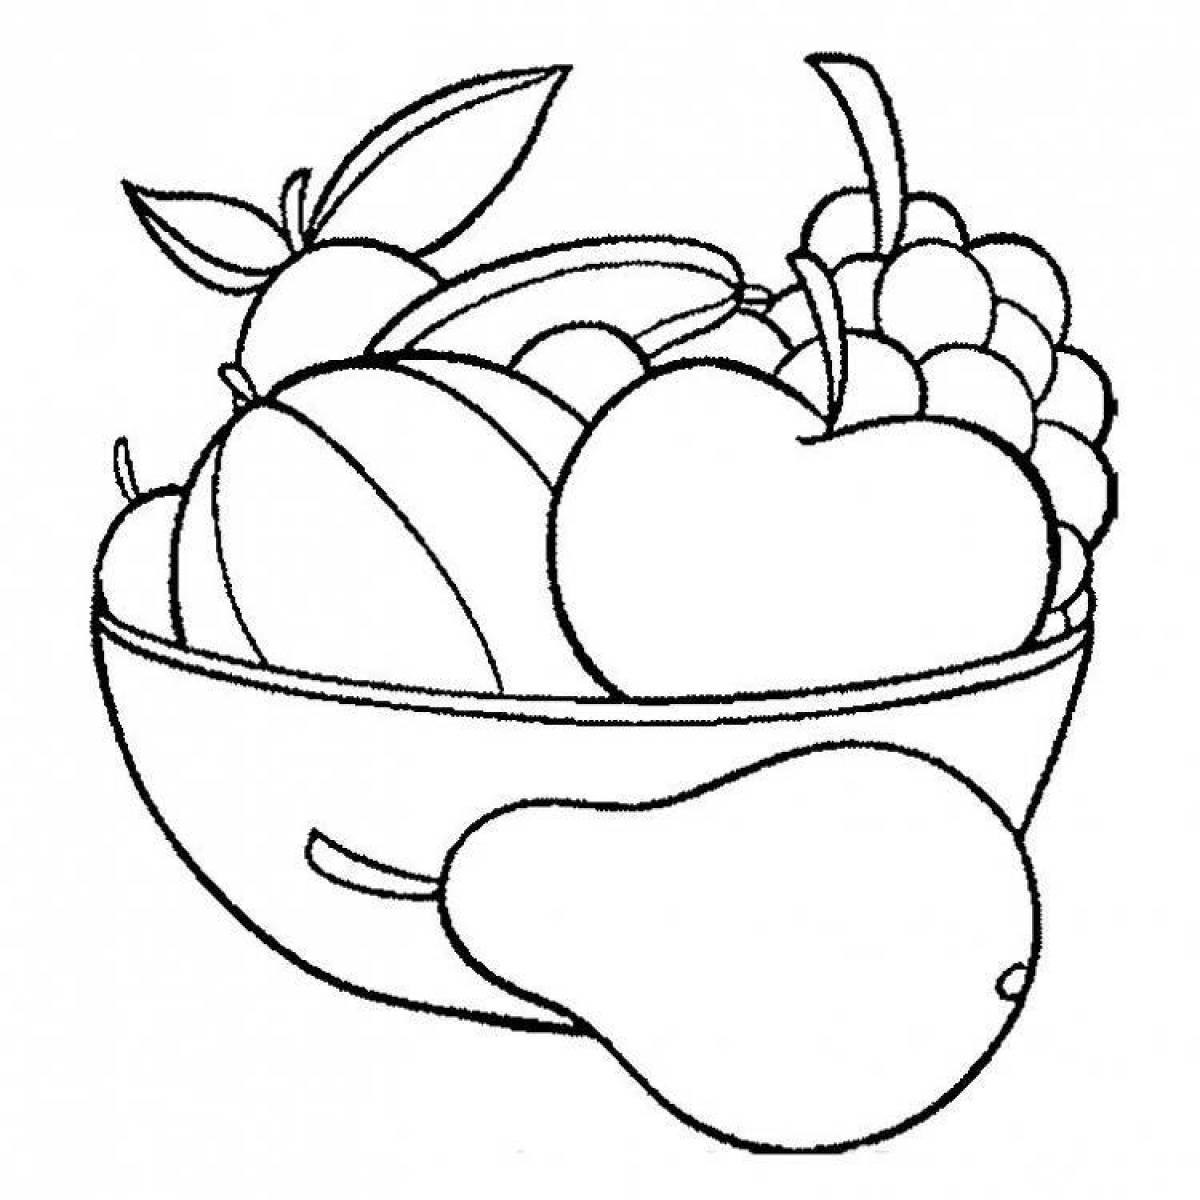 Sweet fruit salad coloring page